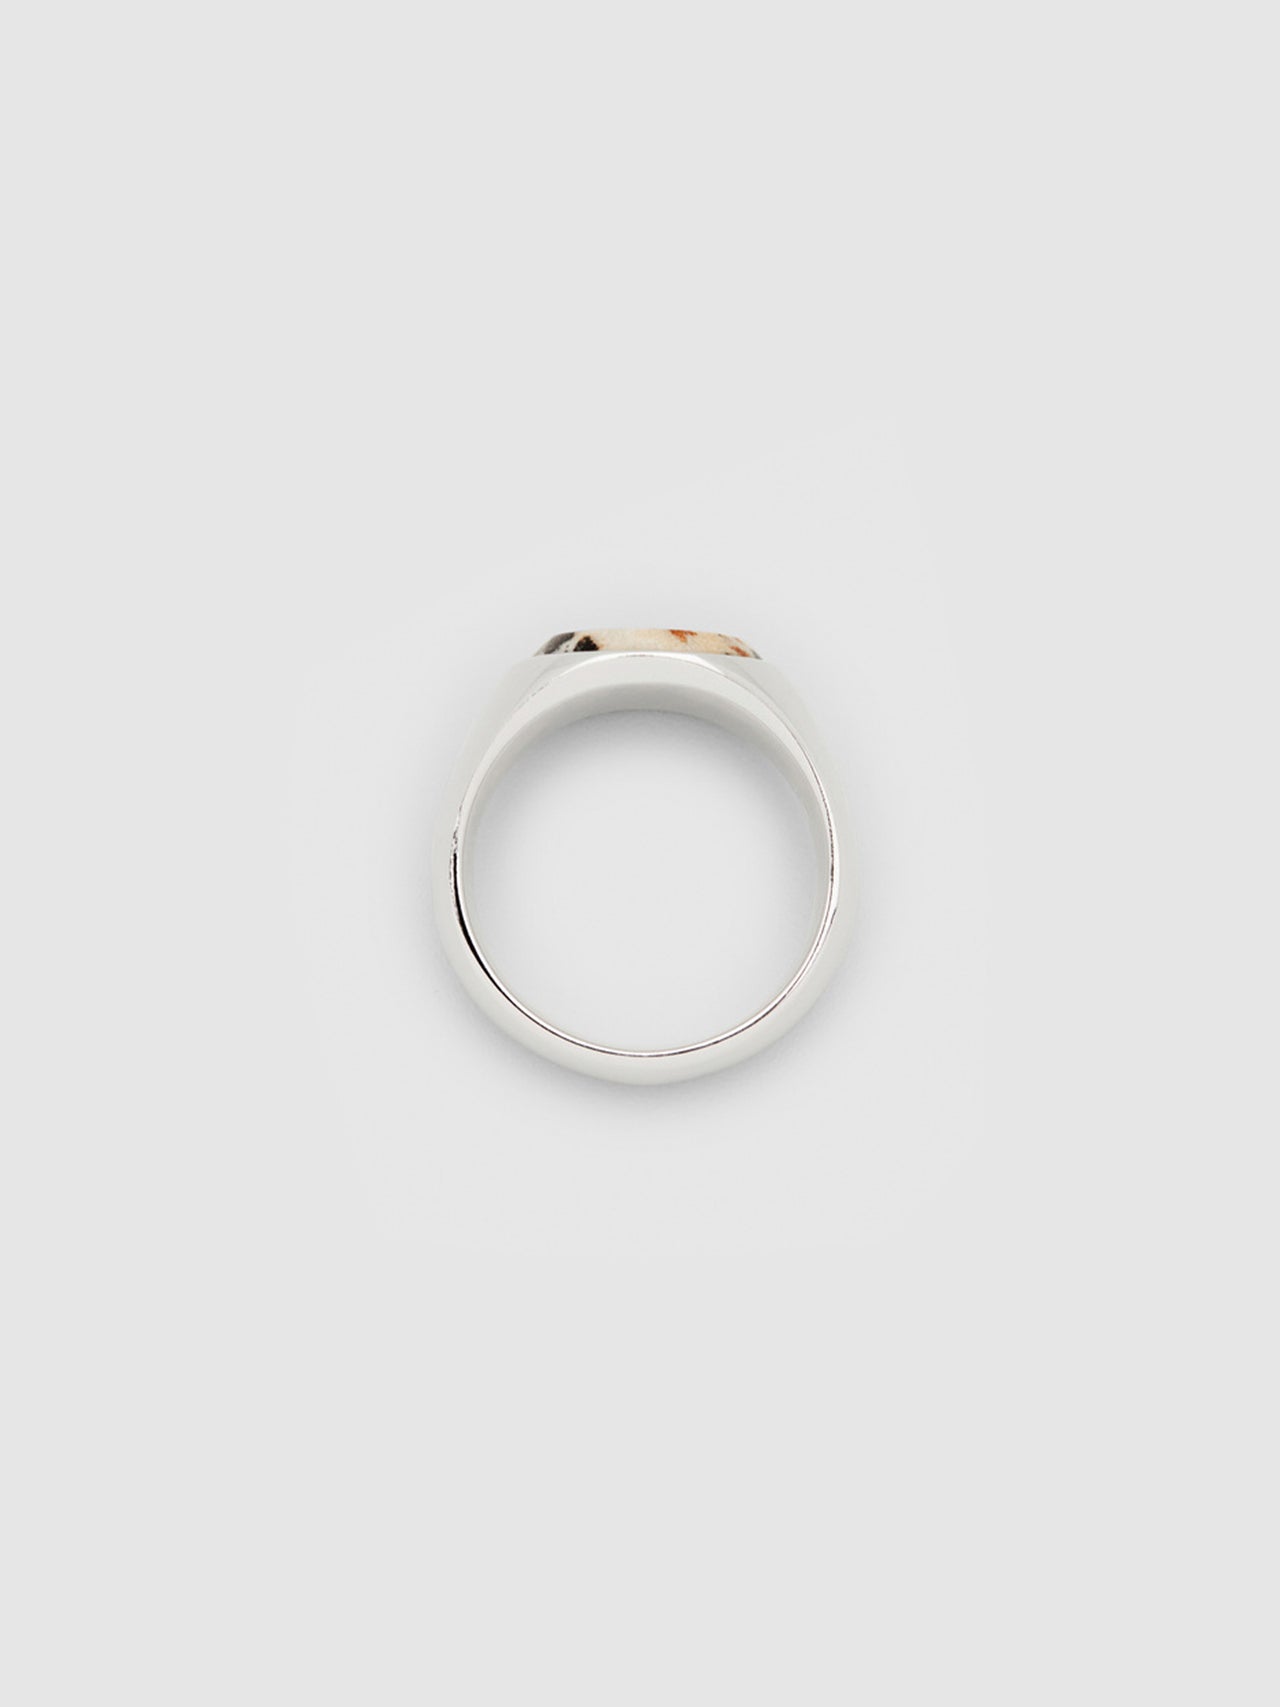 TOMWOOD / Oval Ring (LEOPARD)